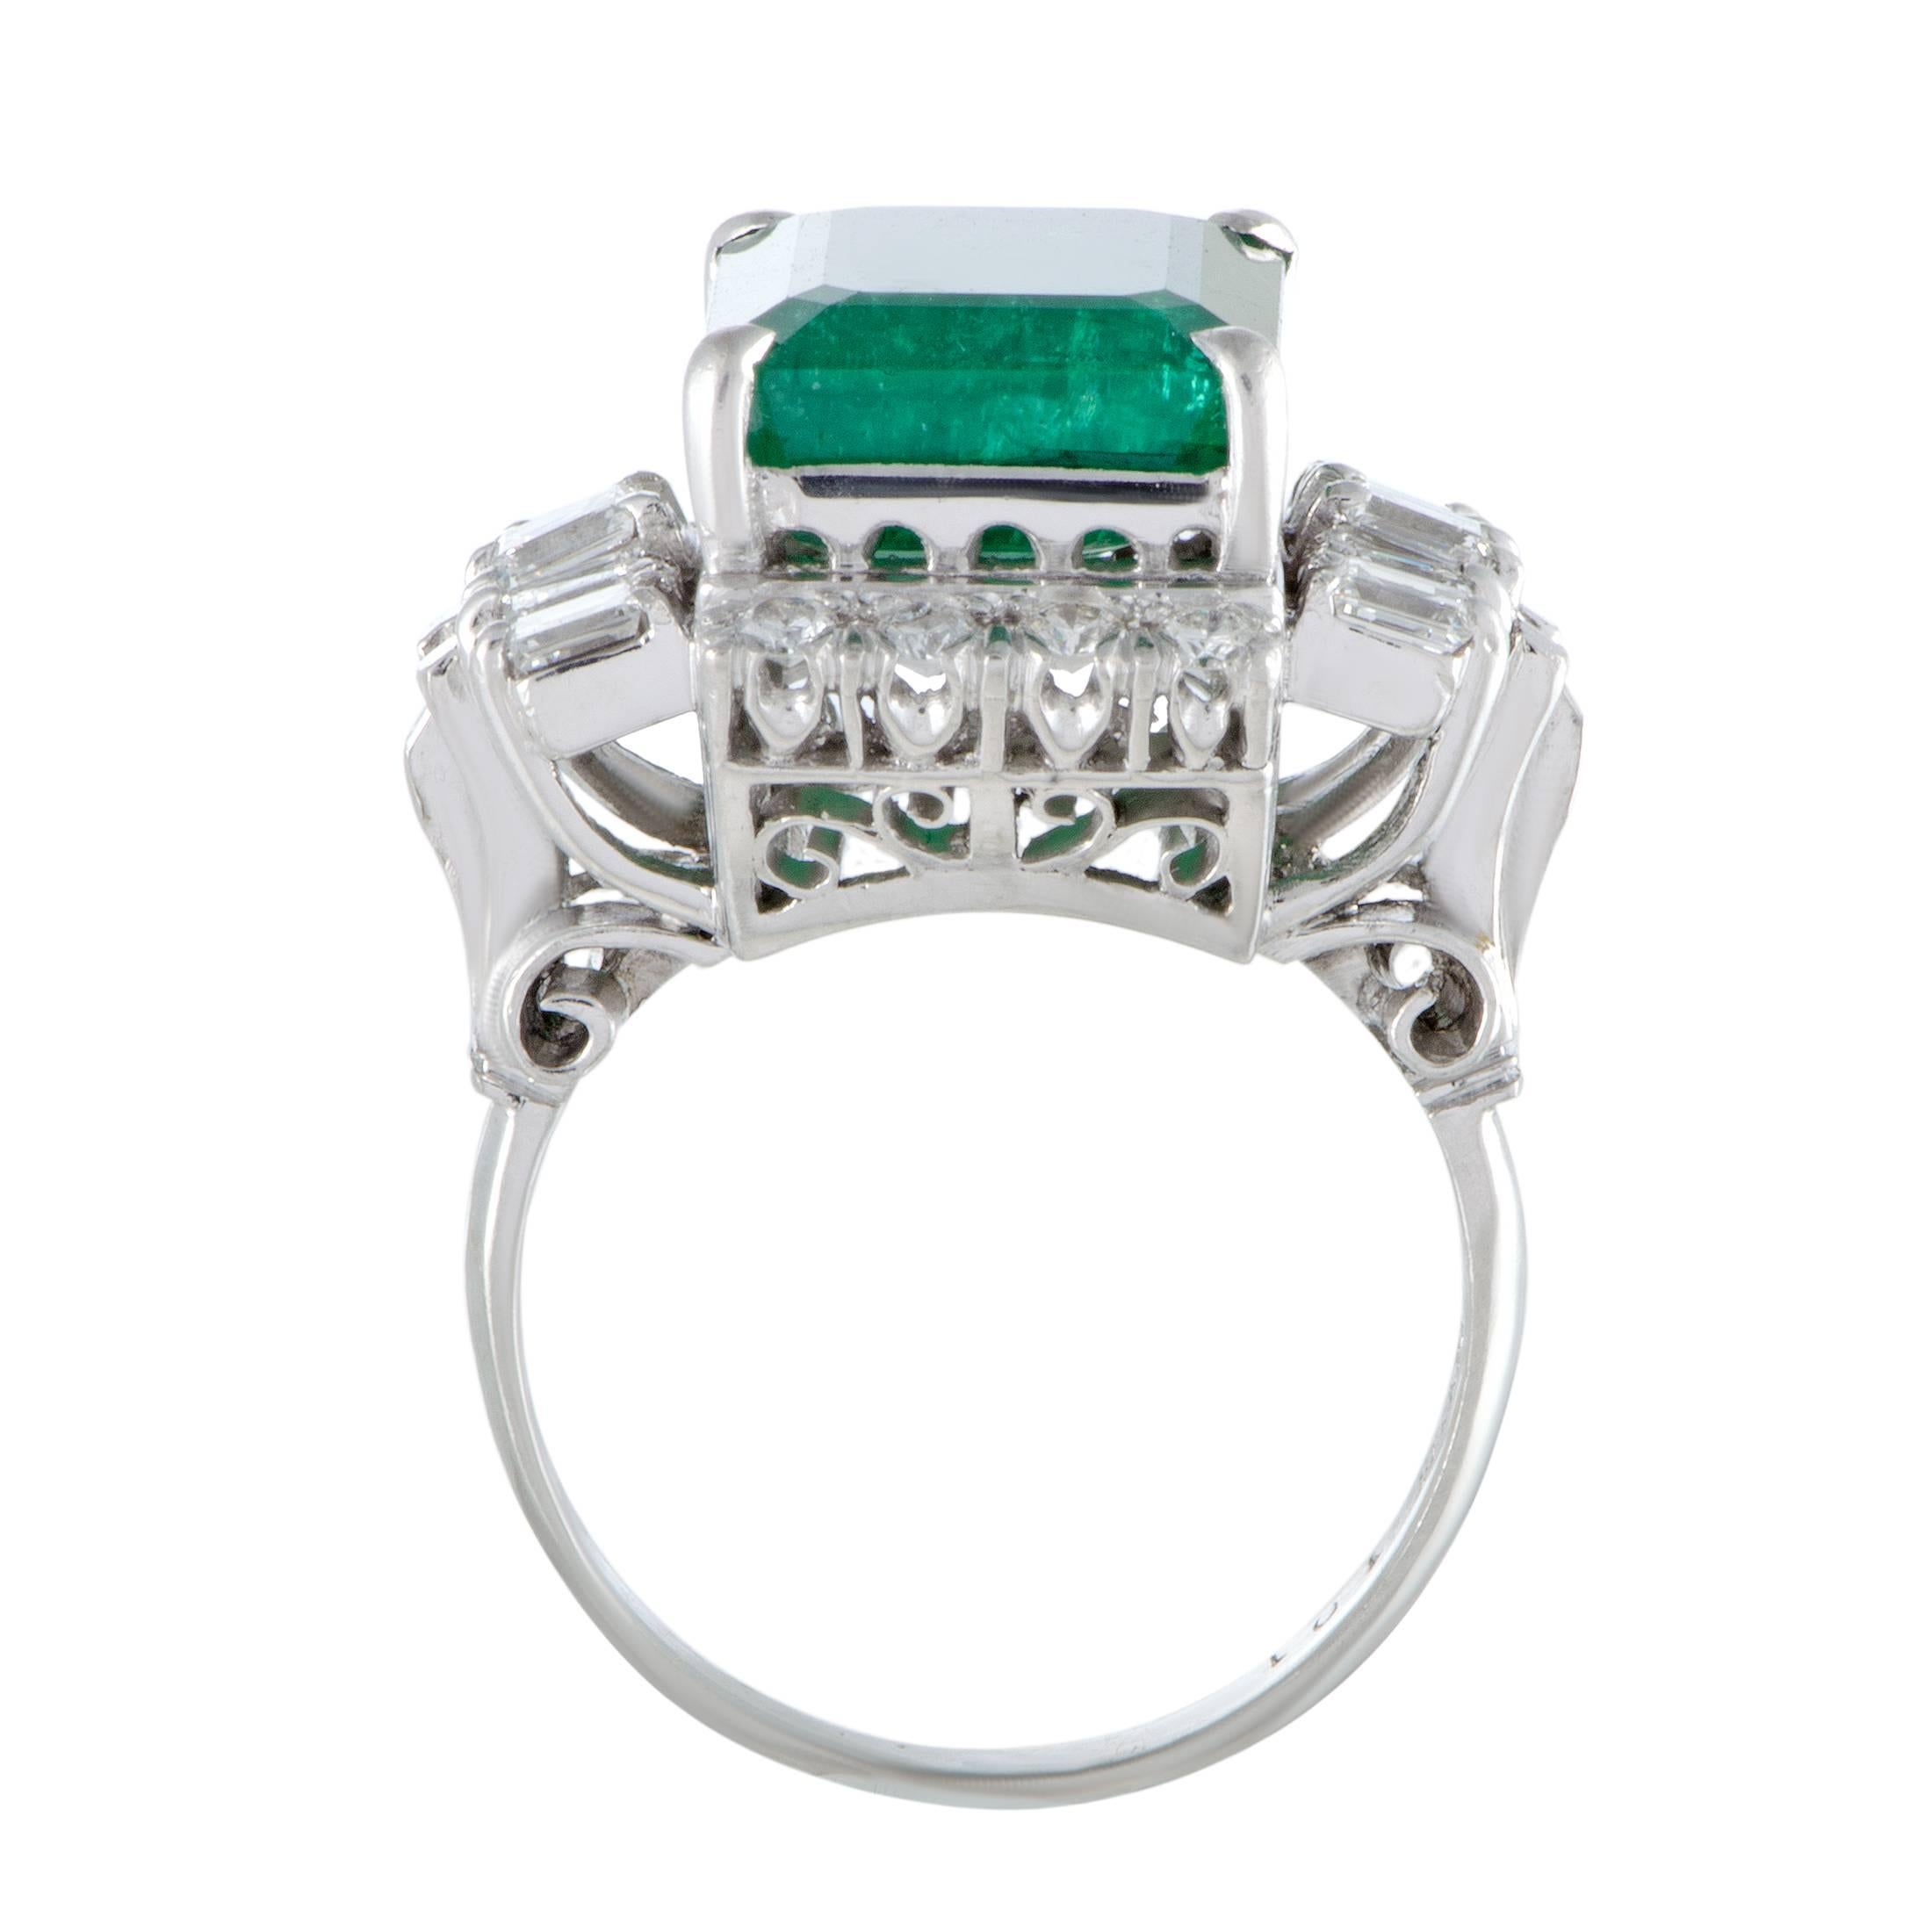 The exquisitely cut emerald is beautifully set against the luxuriously scintillating diamonds and the elegantly gleaming platinum in this superb ring that boasts an incredibly extravagant appeal. The emerald weighs 7.15 carats and it is accentuated